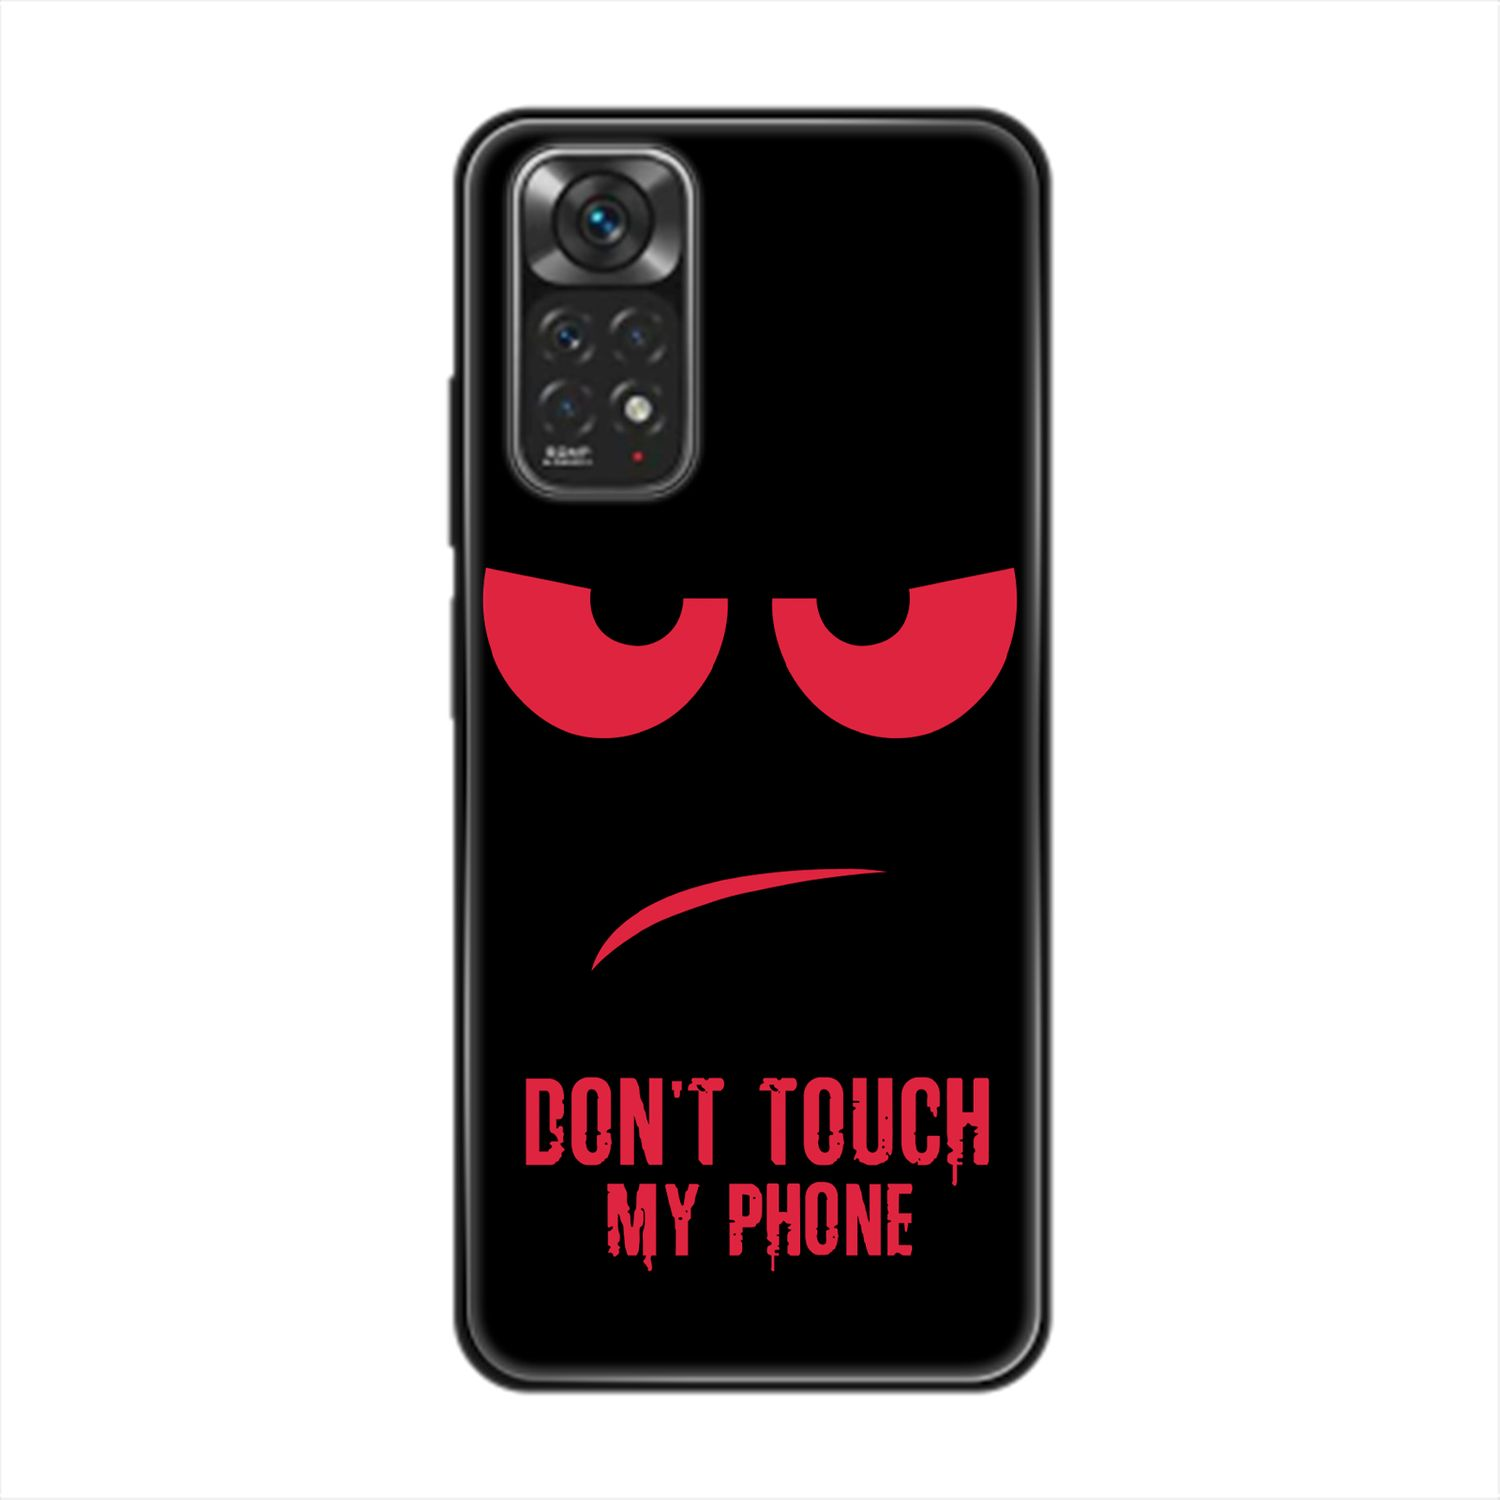 KÖNIG DESIGN Case, Backcover, Xiaomi, Phone Redmi Rot Touch 11, My Dont Note